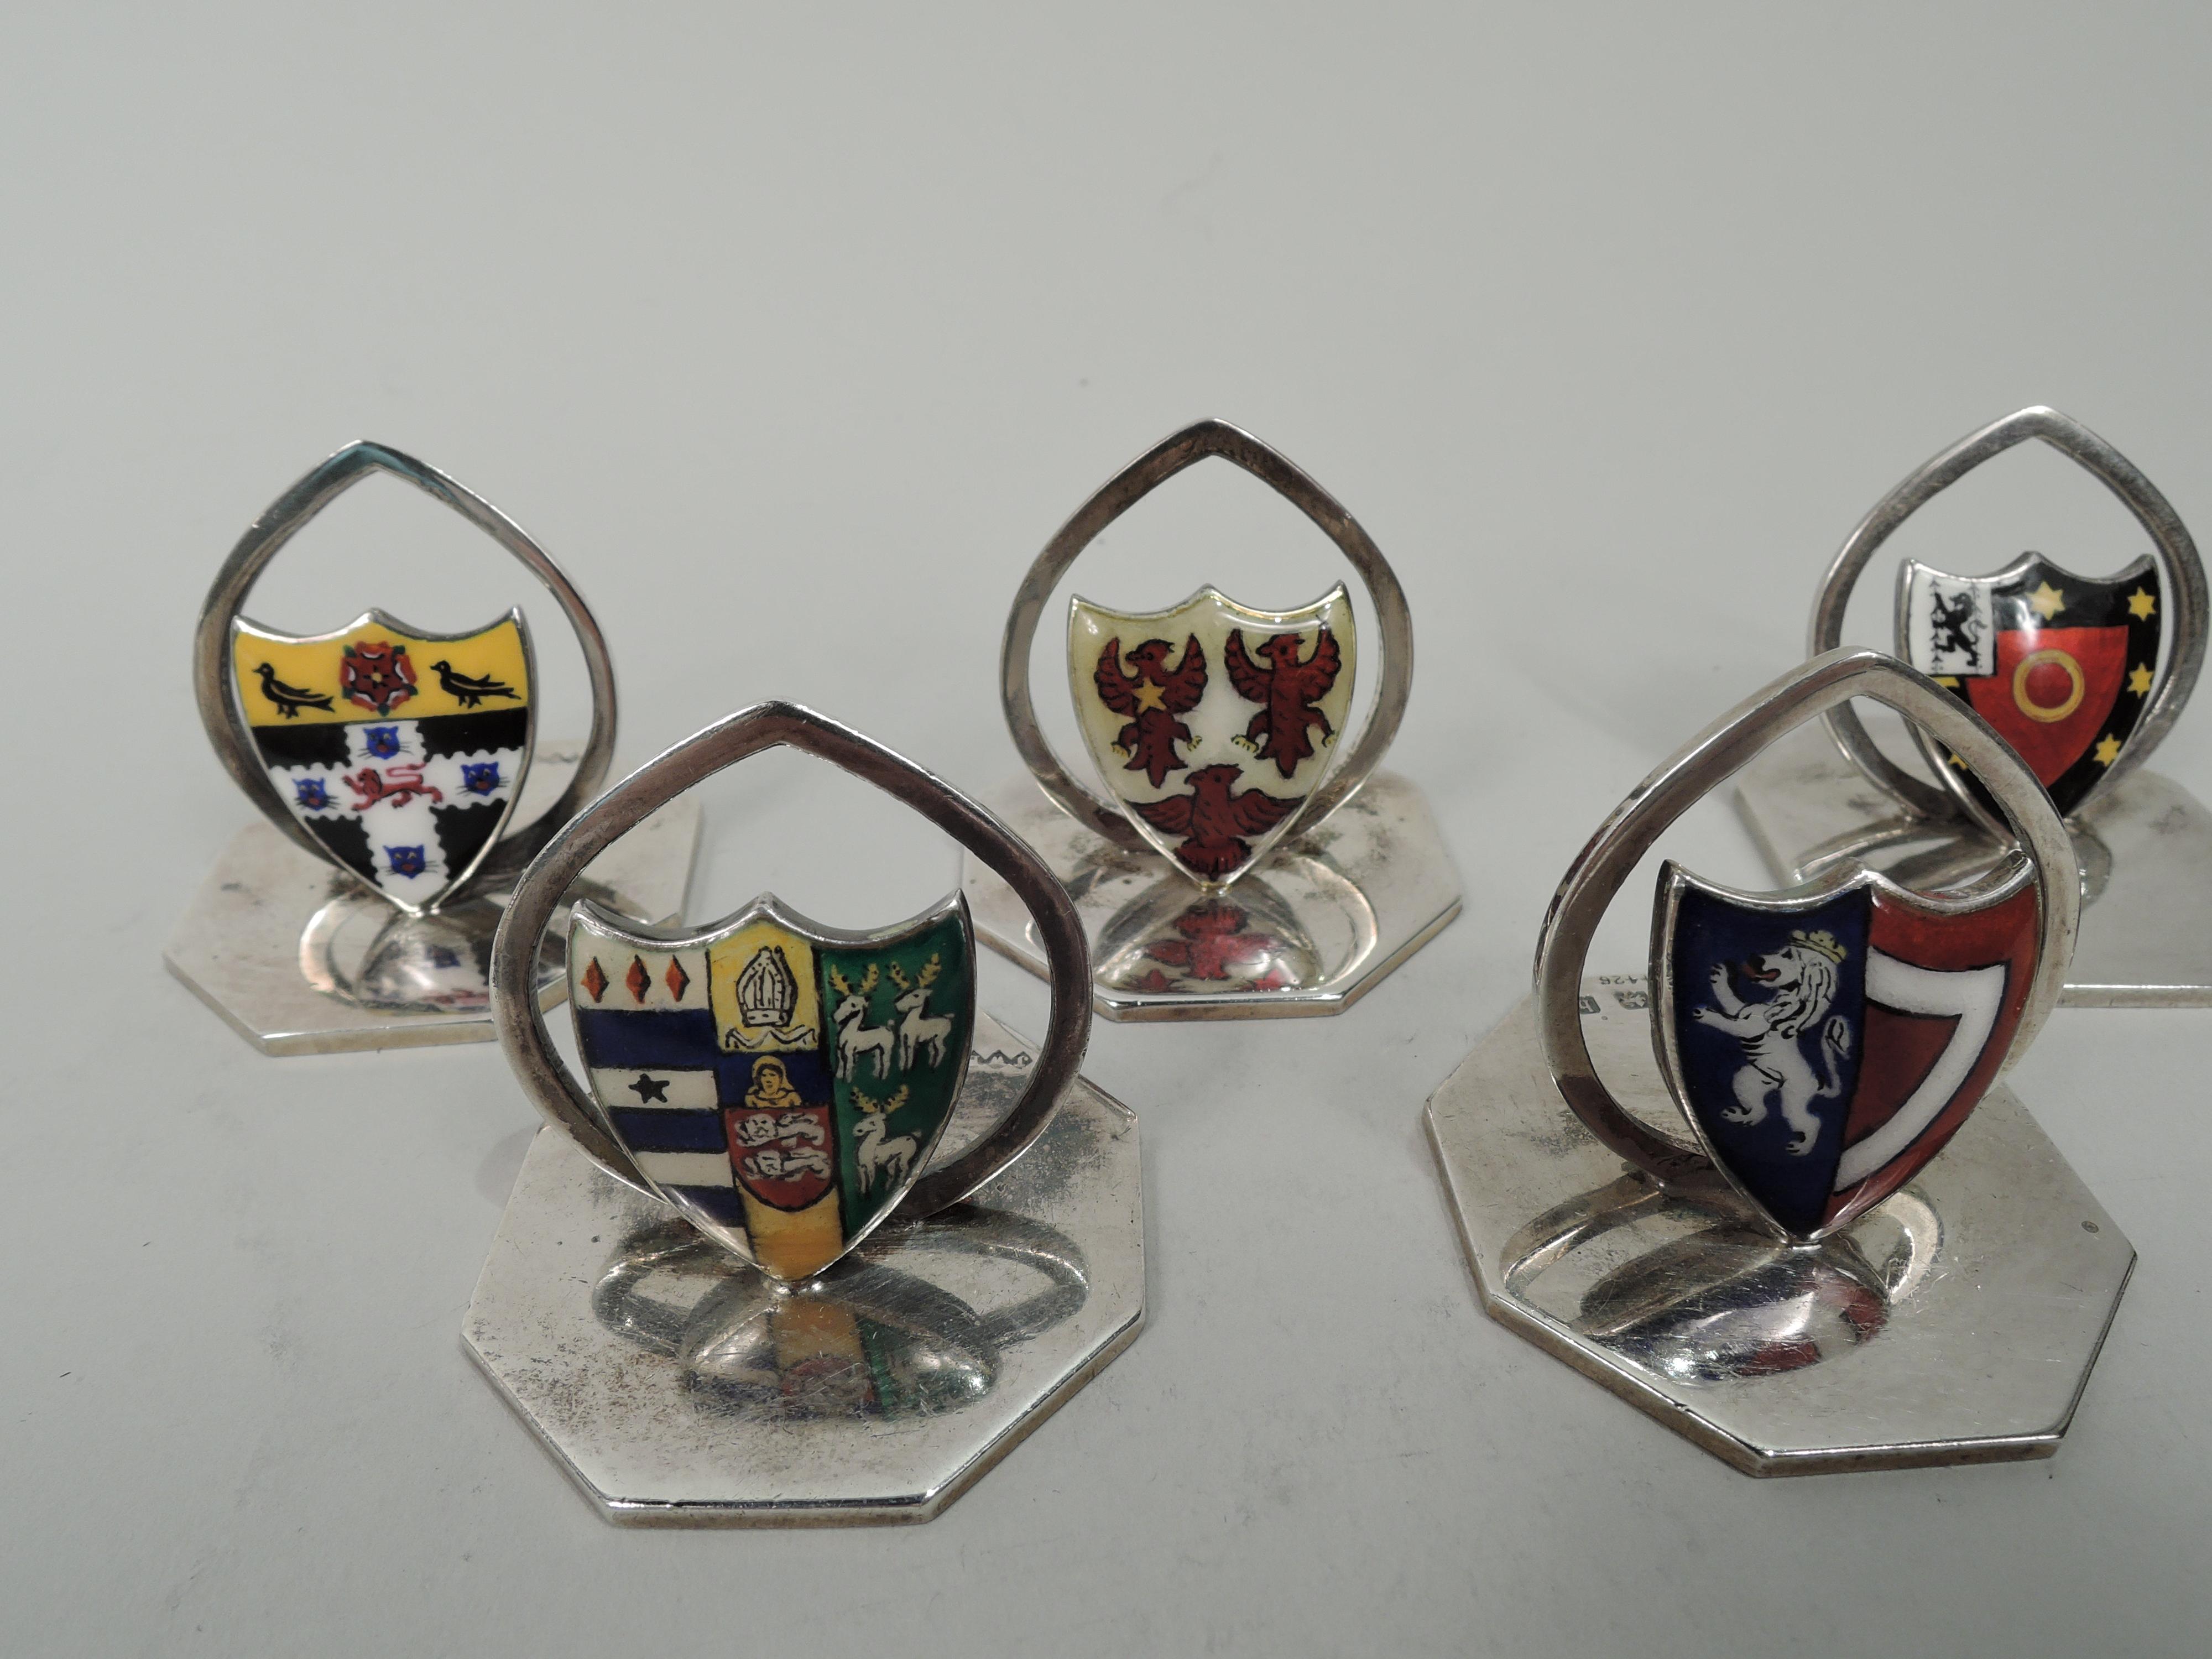 Set of 8 Edwardian sterling silver and enamel place card holders. Made by James William Benson in Birmingham, 1902 to 1909. Each: Enameled coat of arms and open oval clip mounted to flat octagonal base. Each coat of arms different. Symbols include